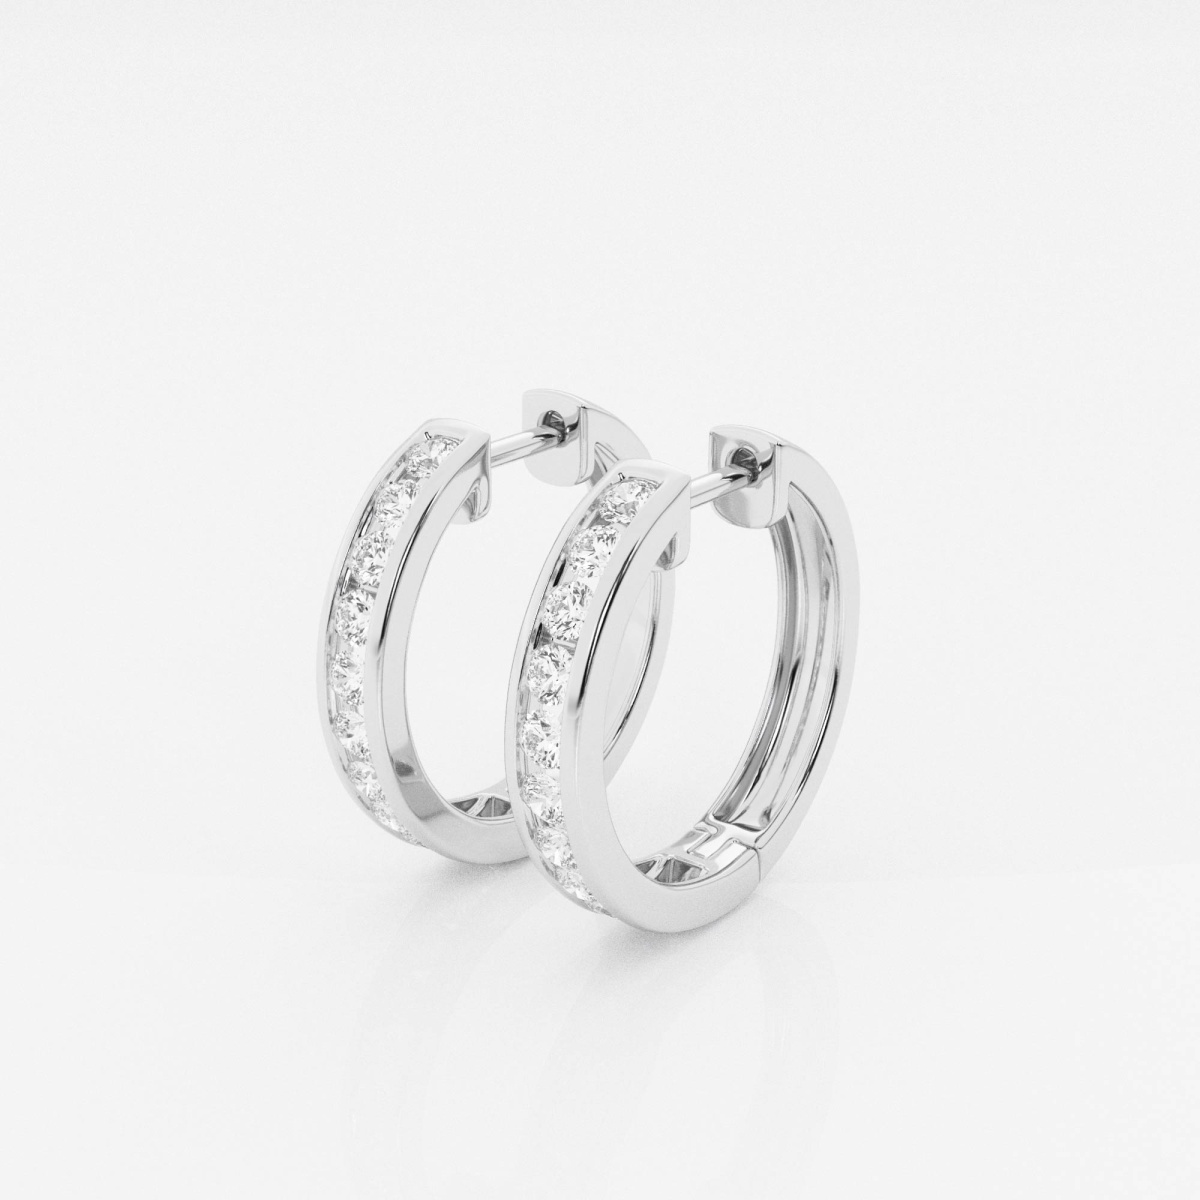 Additional Image 1 for  1 ctw Round Lab Grown Diamond Channel Set Hoop Earrings